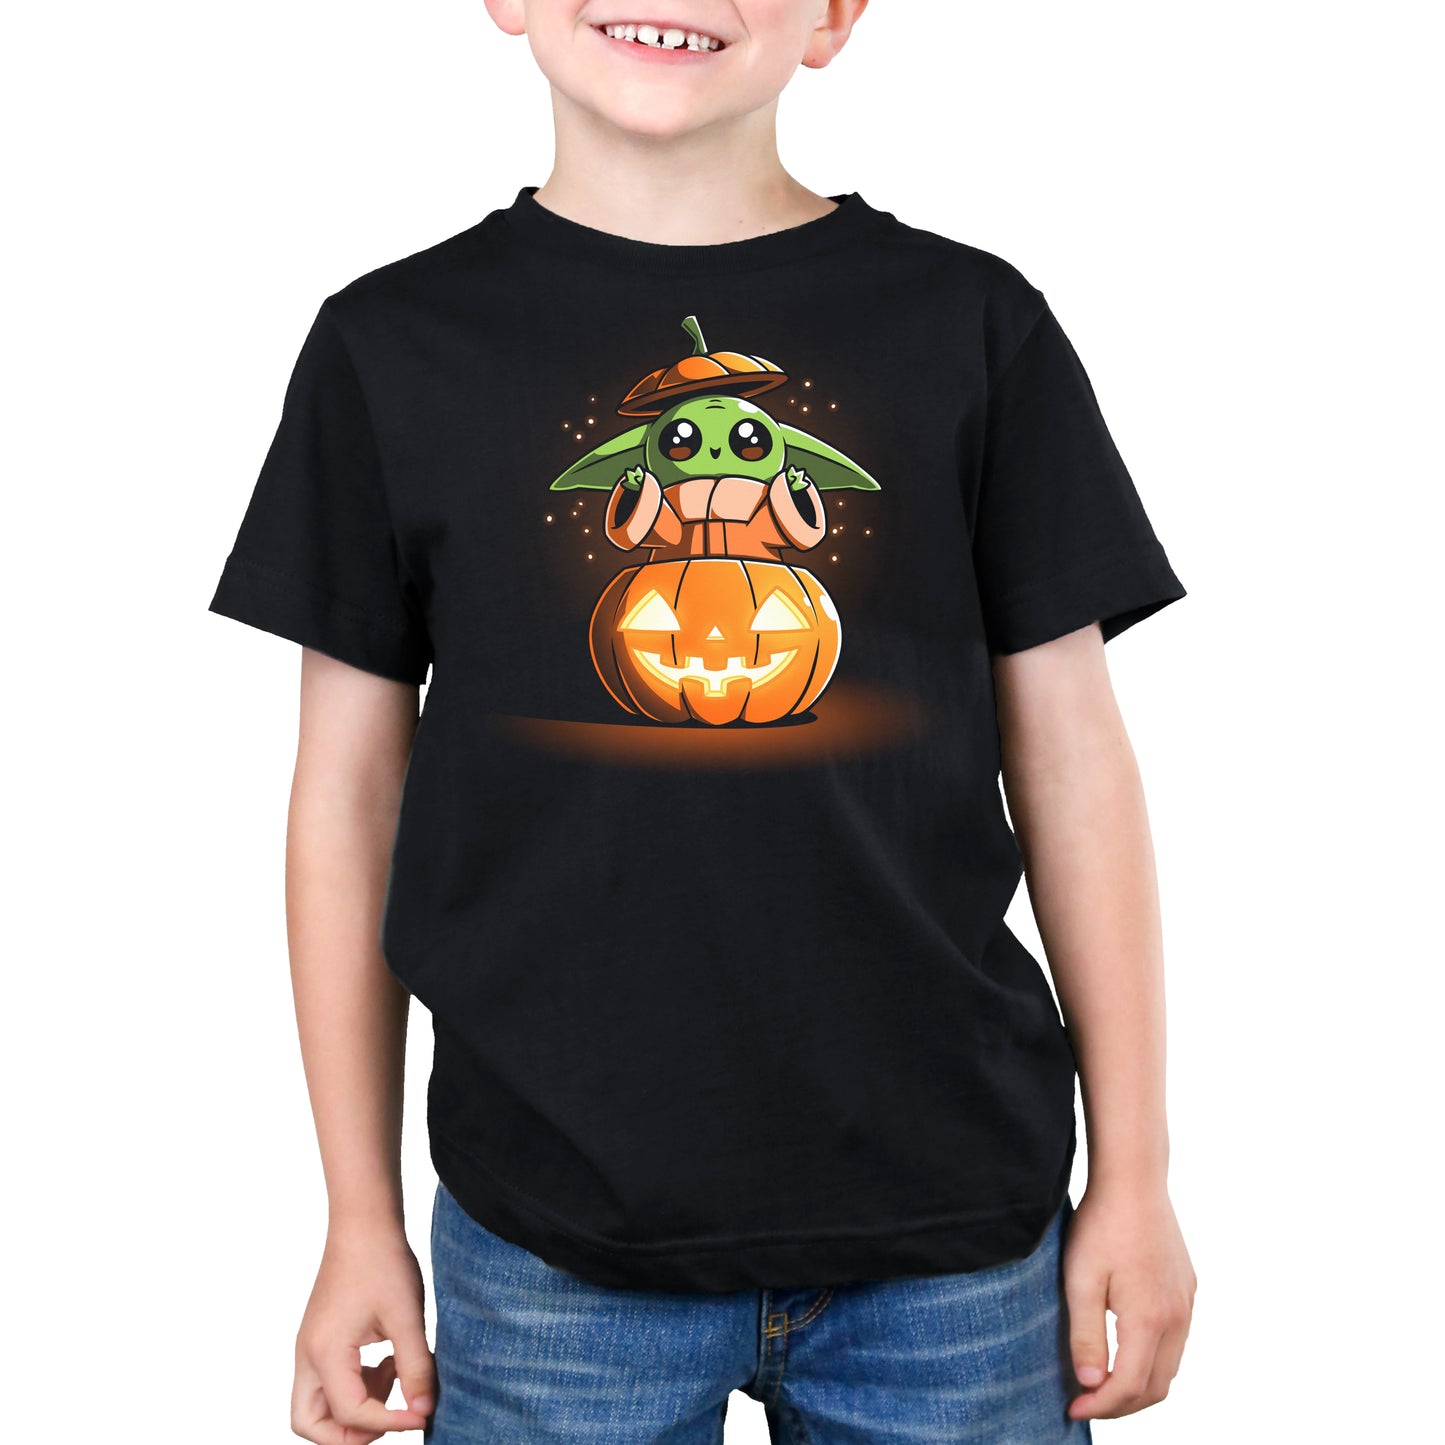 A young boy wearing an officially licensed black t-shirt with Pumpkin Grogu on it from Star Wars: The Mandalorian.